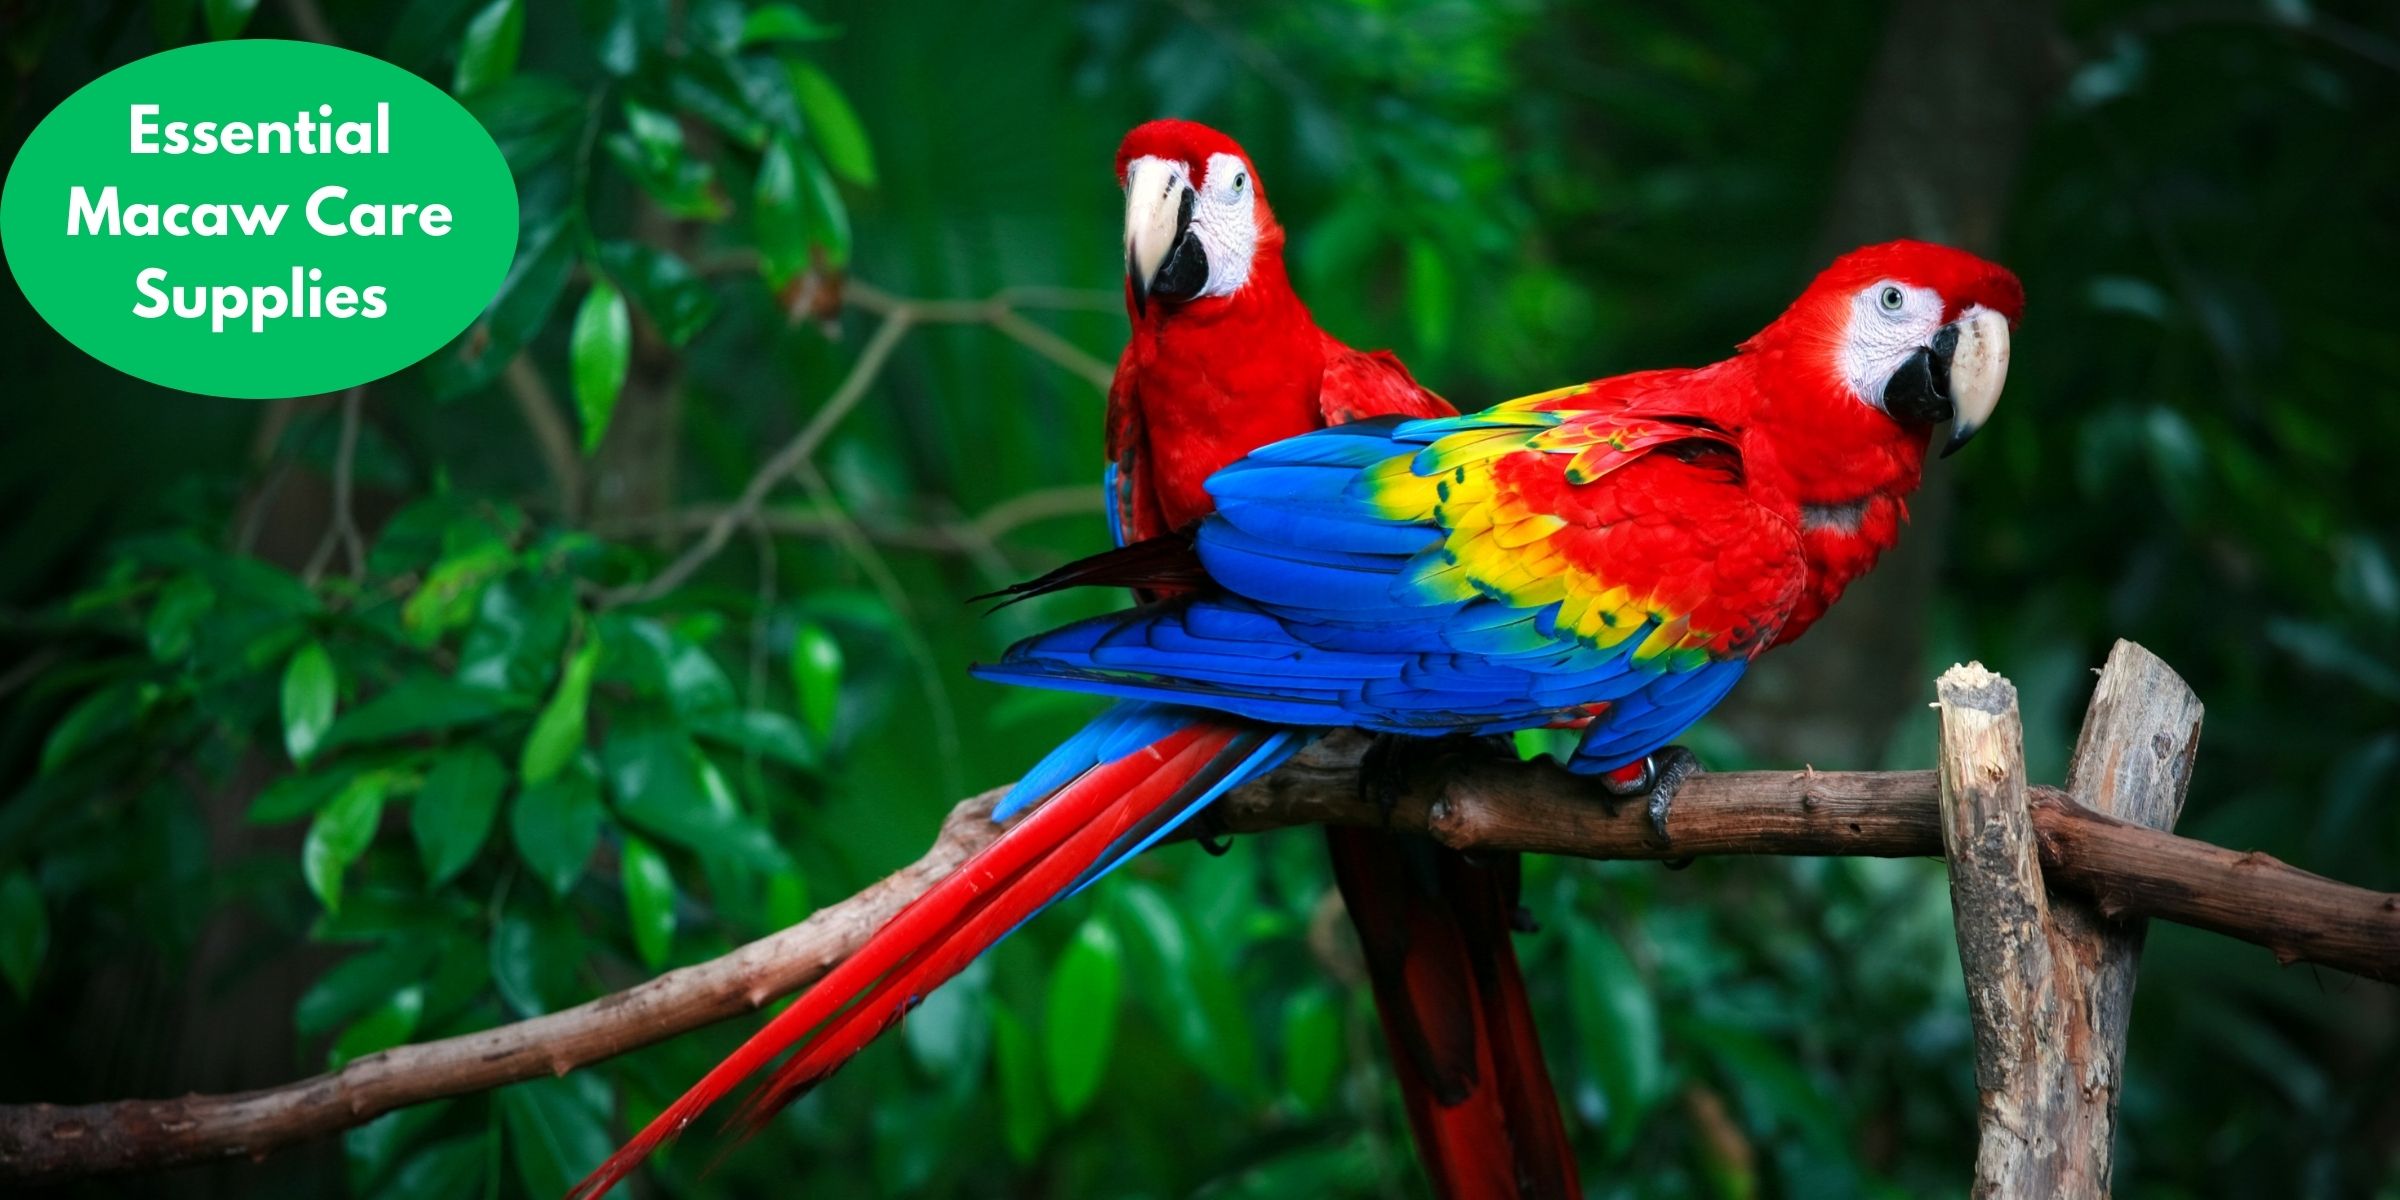 Essential Macaw Care Supplies